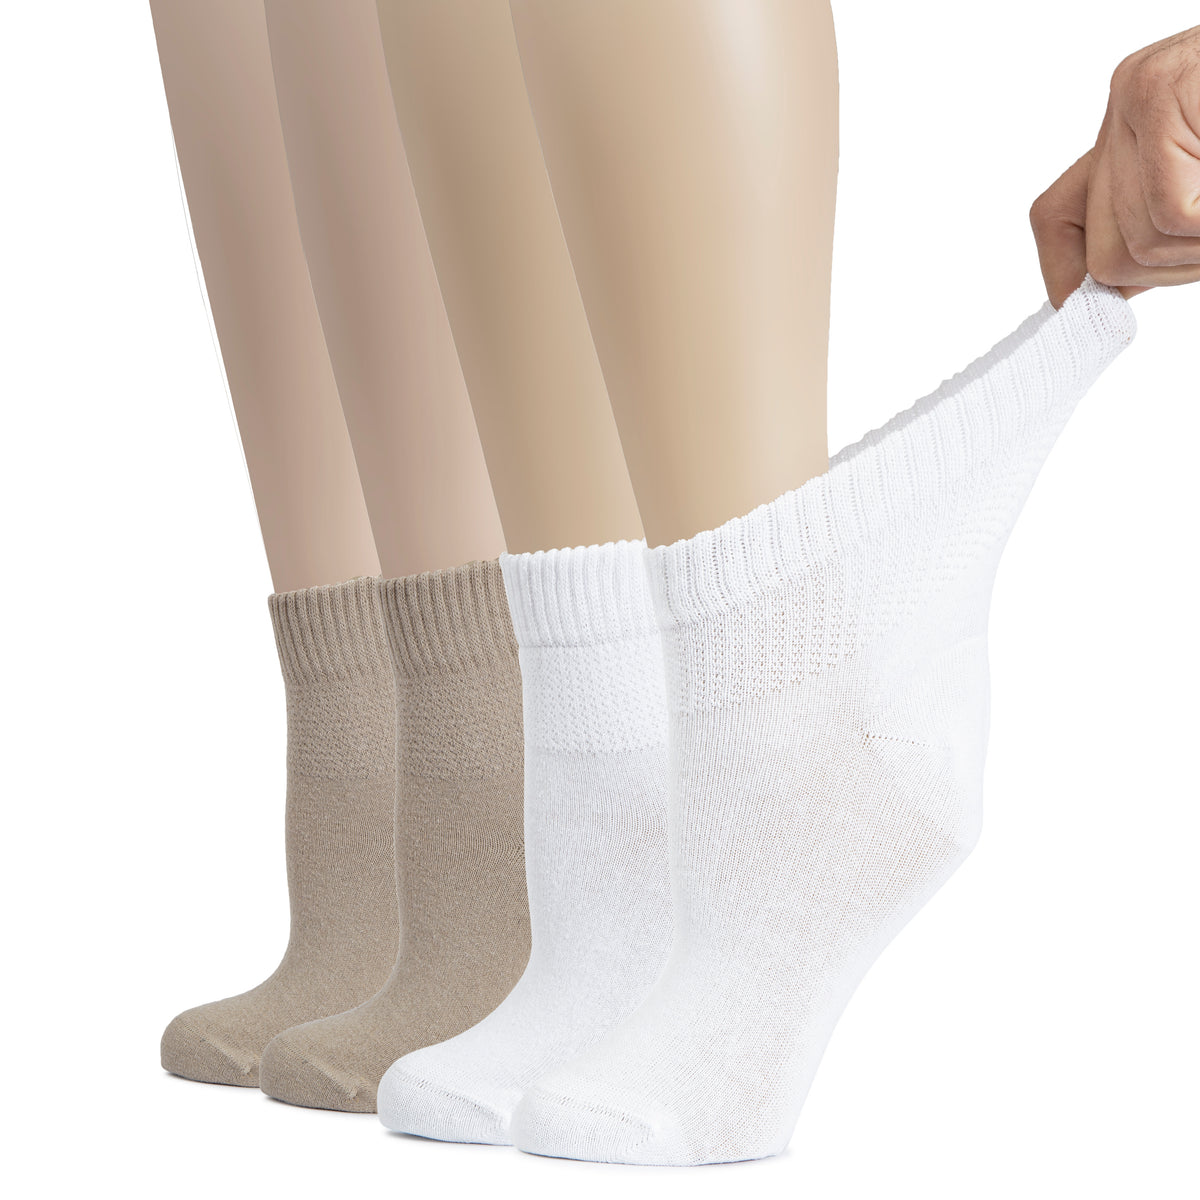 Hugh Ugoli Cotton Diabetic Women's Socks, Ankle Height, Loose, Wide Stretchy, Thin, Seamless Toe and Non-Binding Top, 4 Pairs | Shoe Size: 10-12 | LightGrey / White